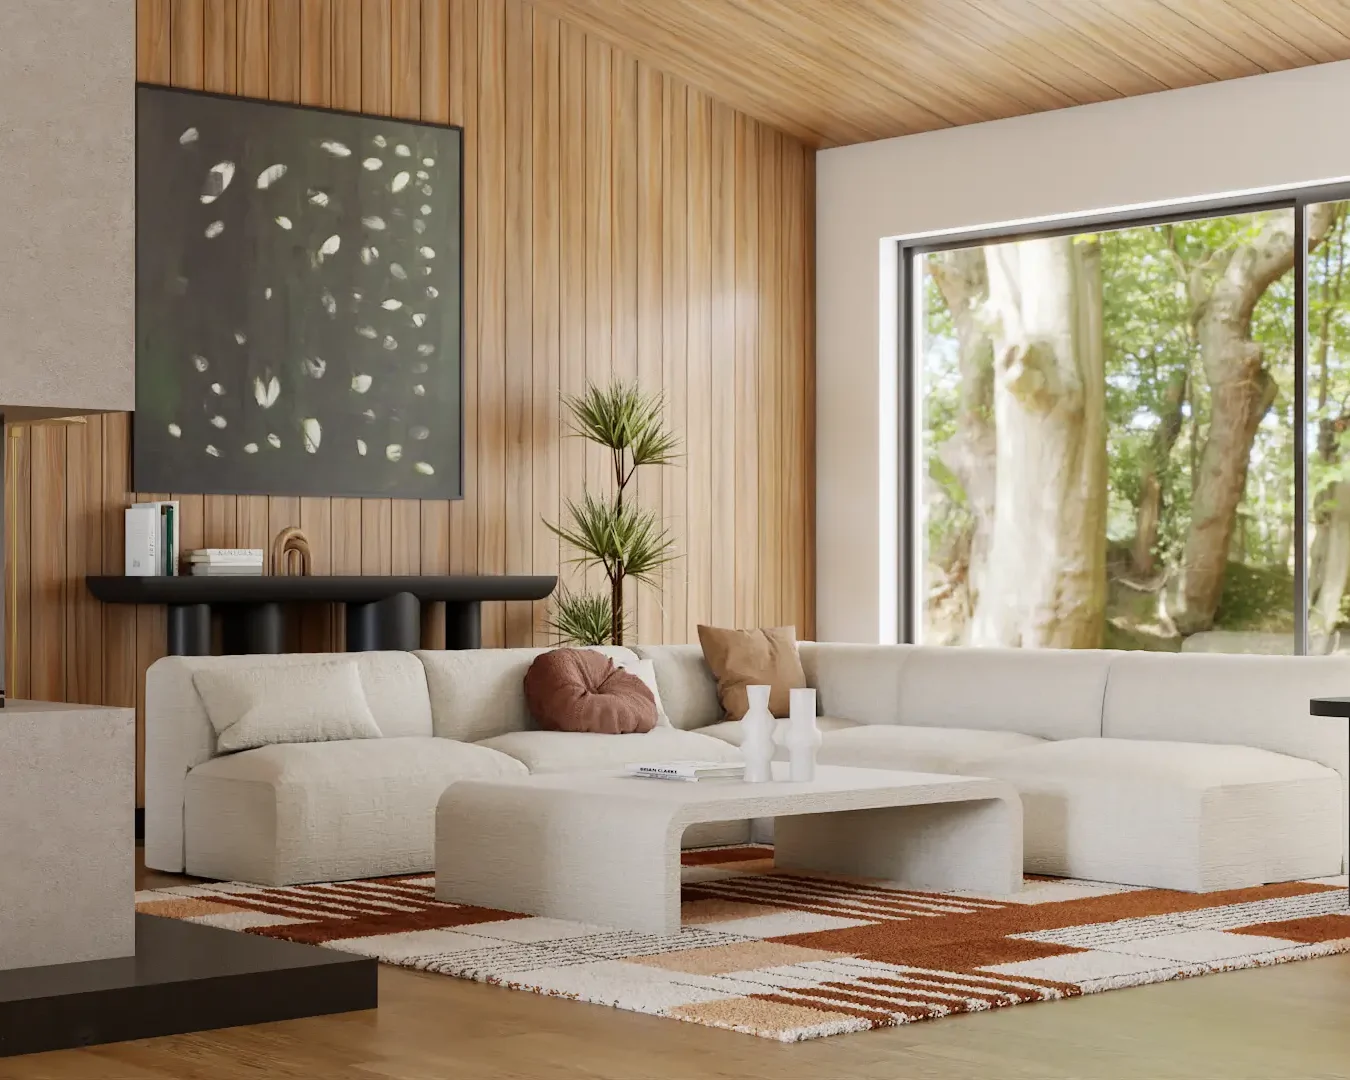 Modern living room with warm wooden panels, plush white sectional sofa, and a nature-inspired abstract painting, creating a harmonious and inviting space. Design by Debora, an online interior design service.